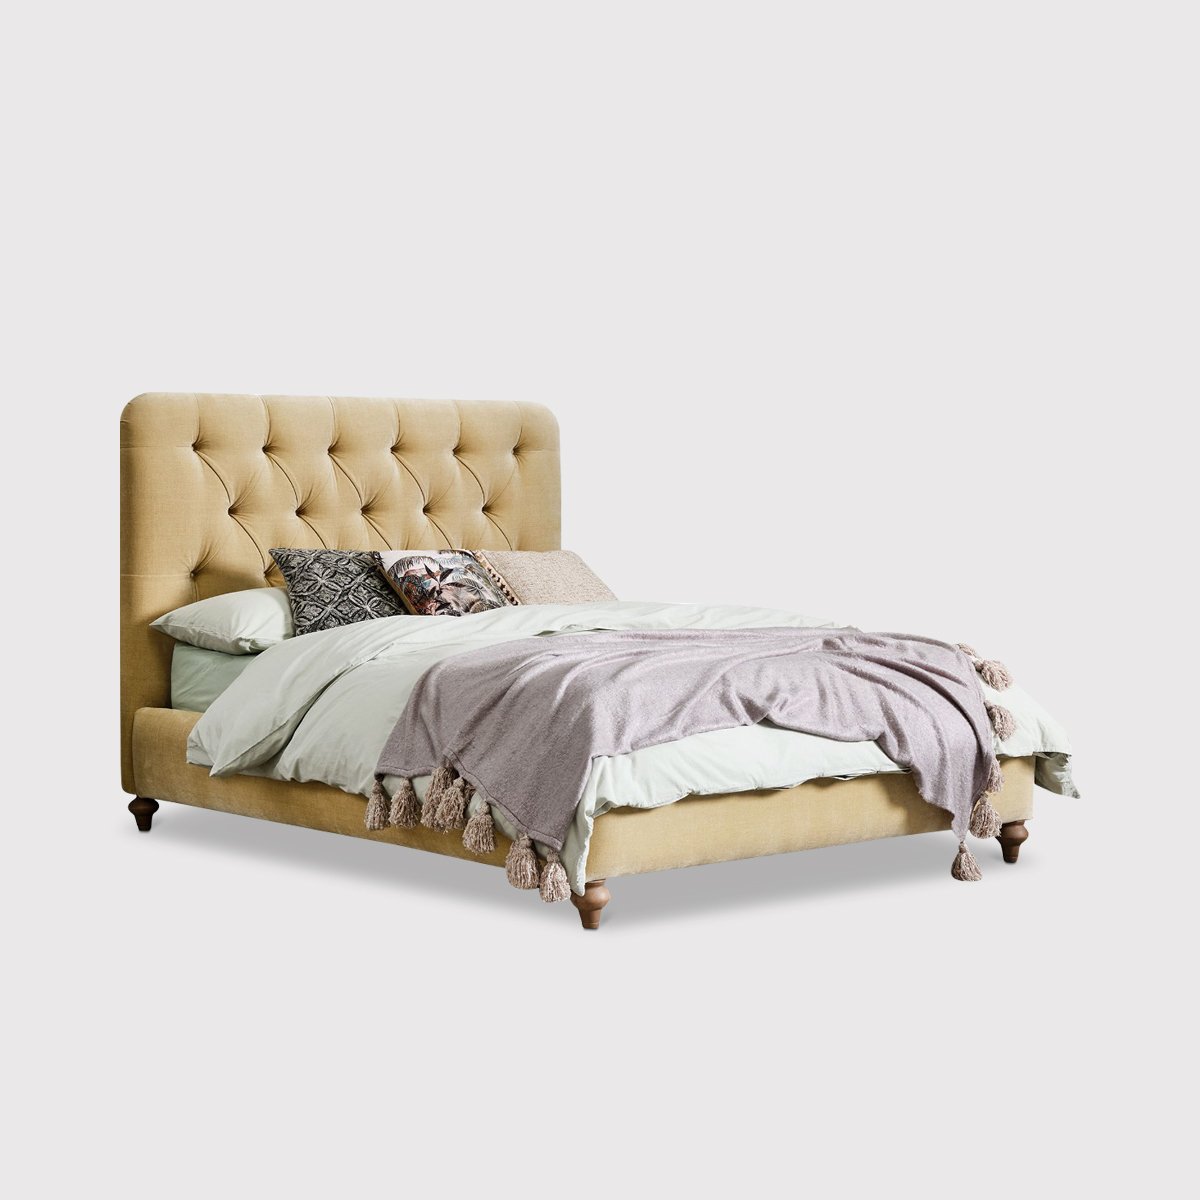 Delphine Double Bed Frame, Yellow | Barker & Stonehouse